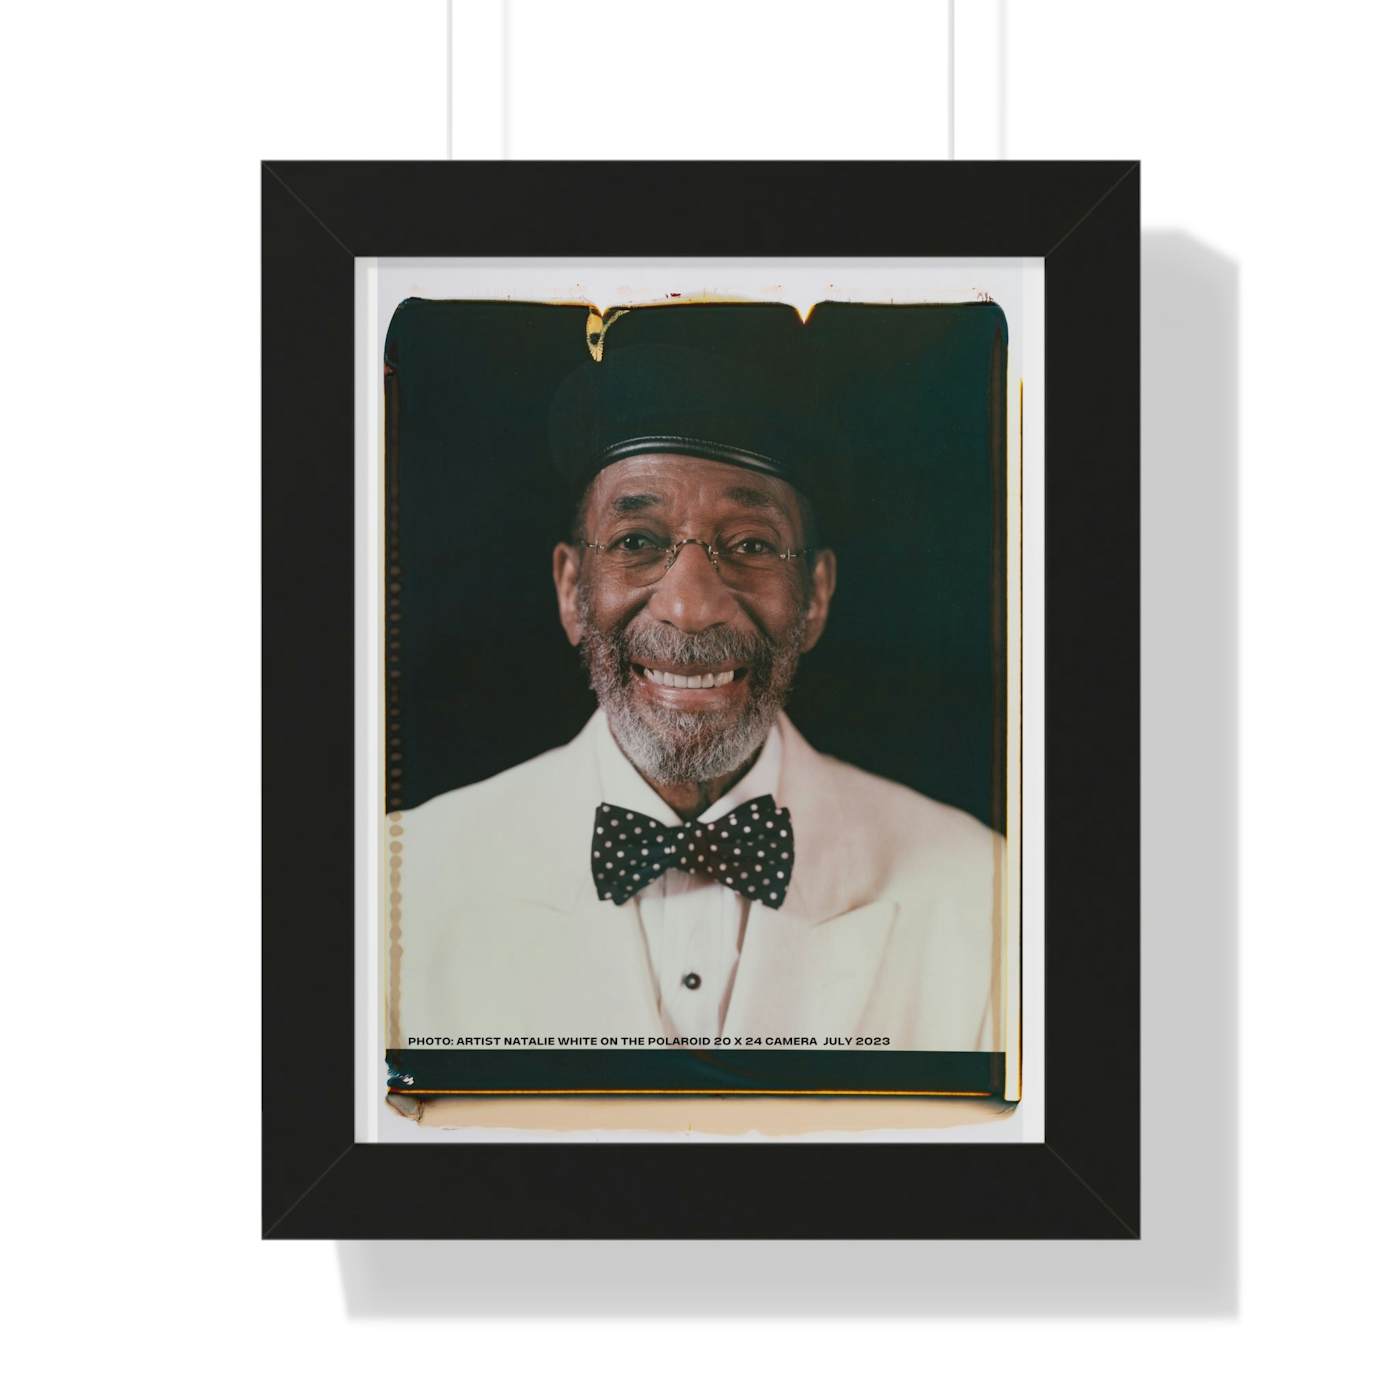 Ron Carter Framed Poster of Iconic Photo shot by an Iconic Artist of an Iconic Musician